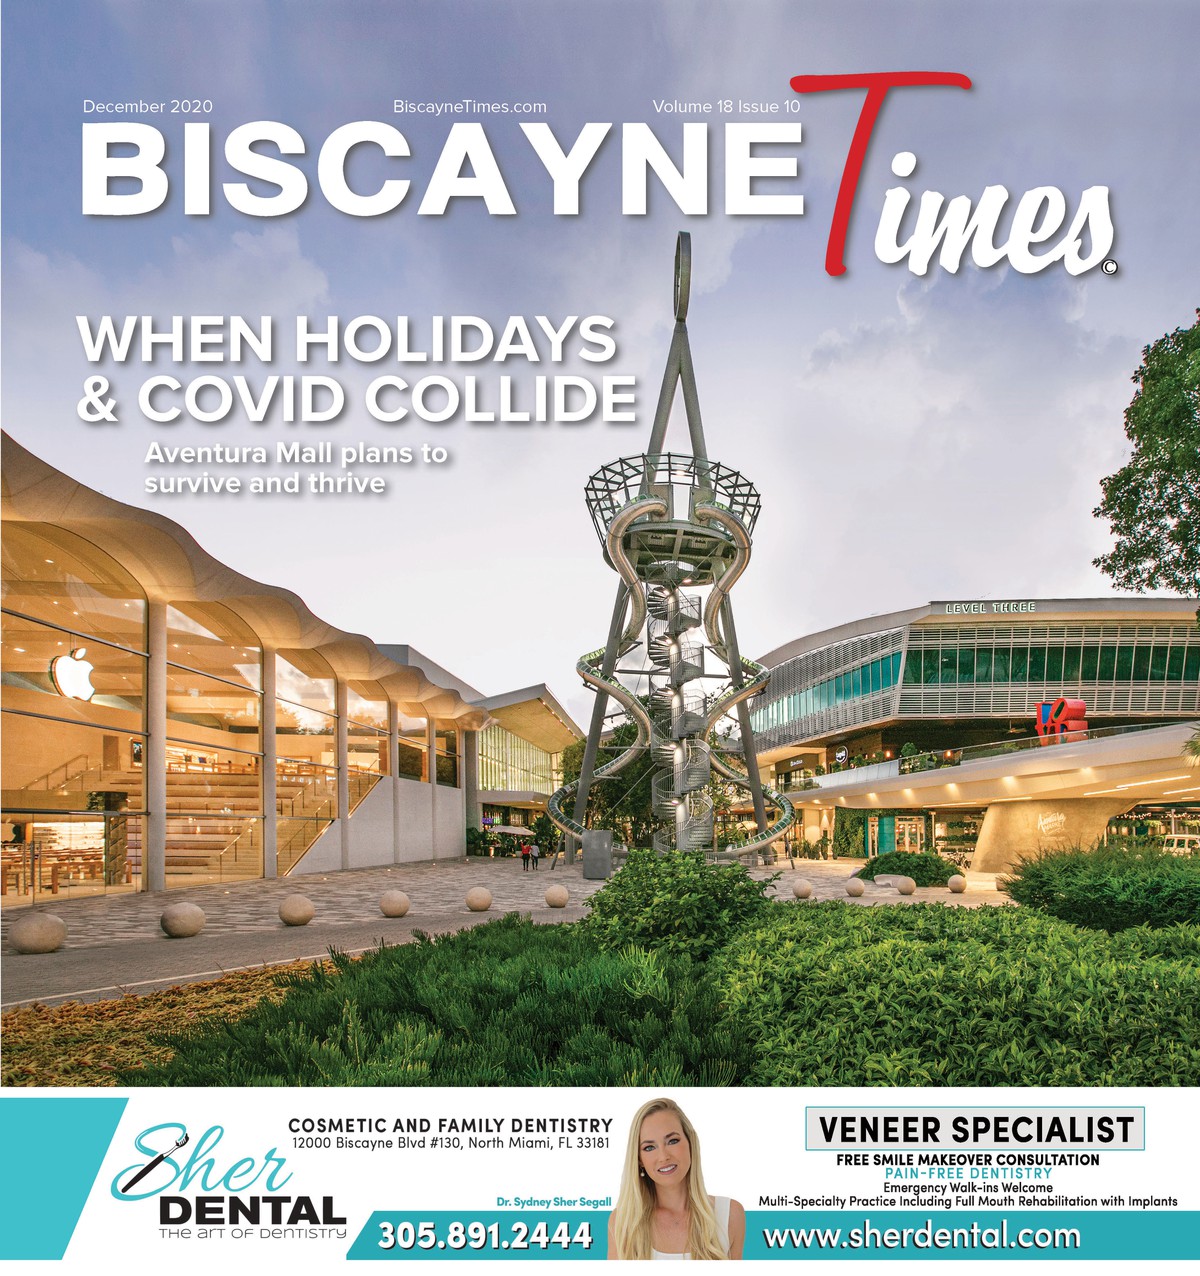 When the Holidays and Coronavirus Collide - Biscayne Times